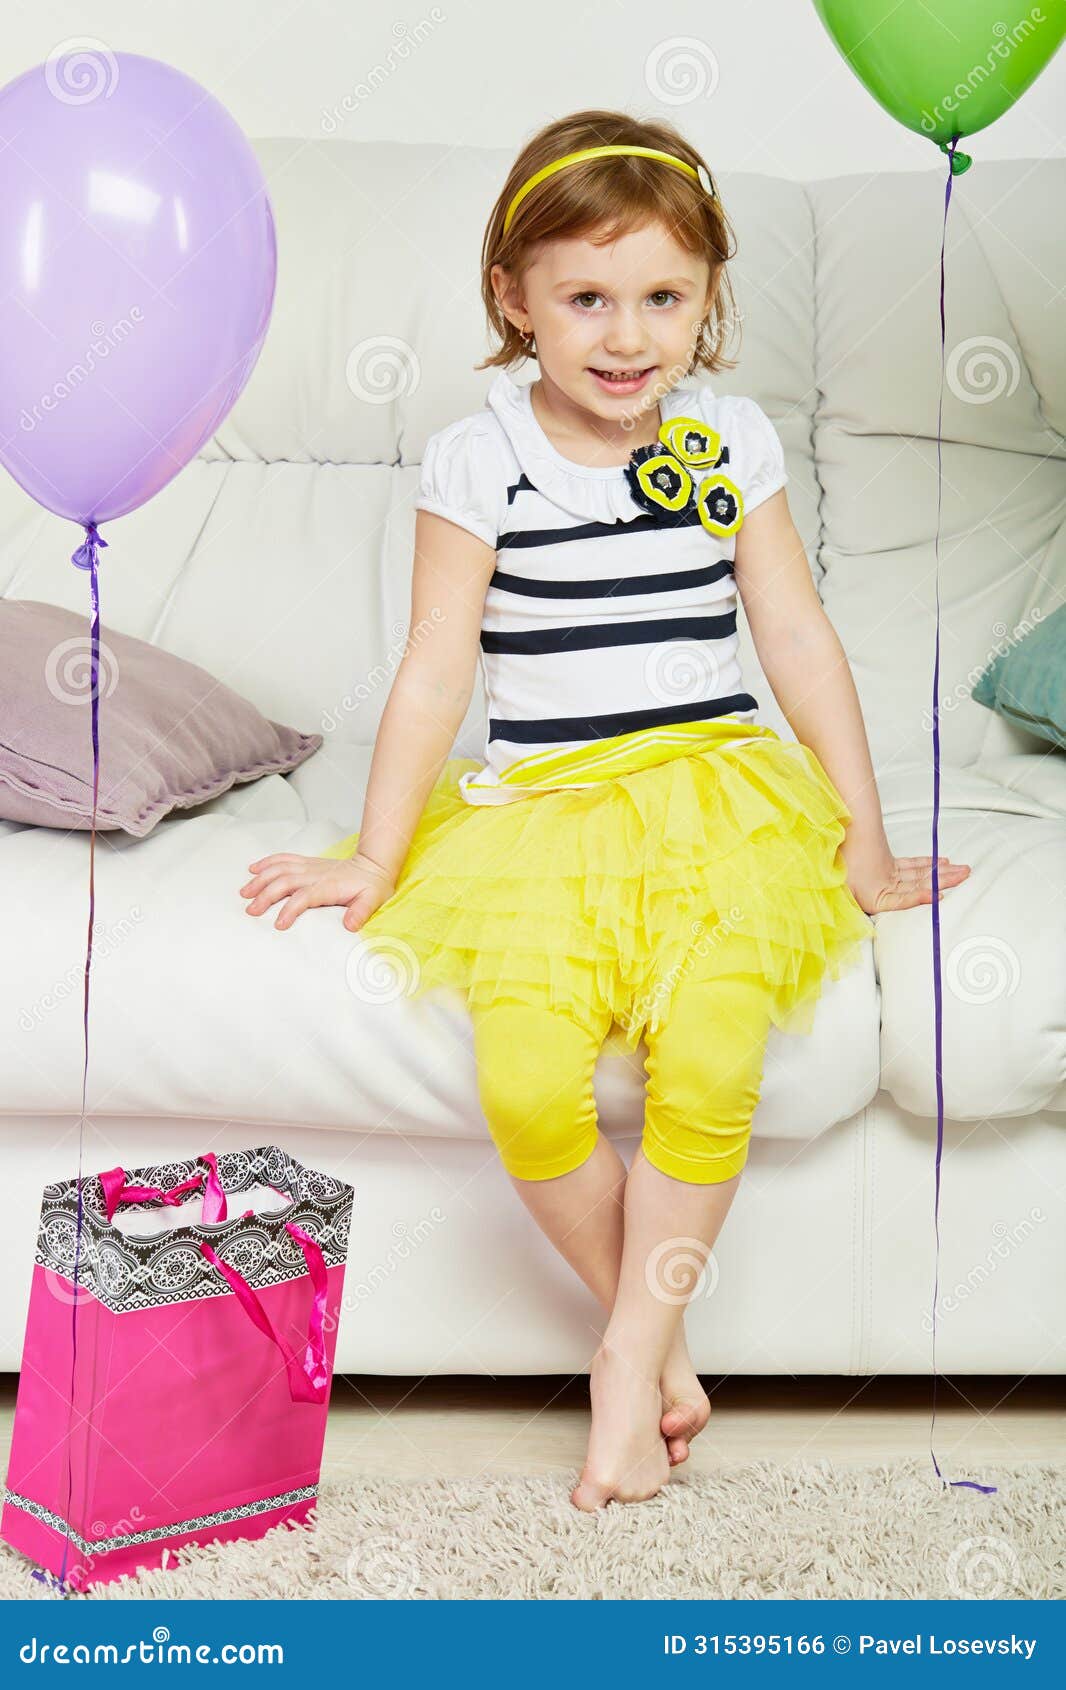 little barefooted girl sits on big sofa in room